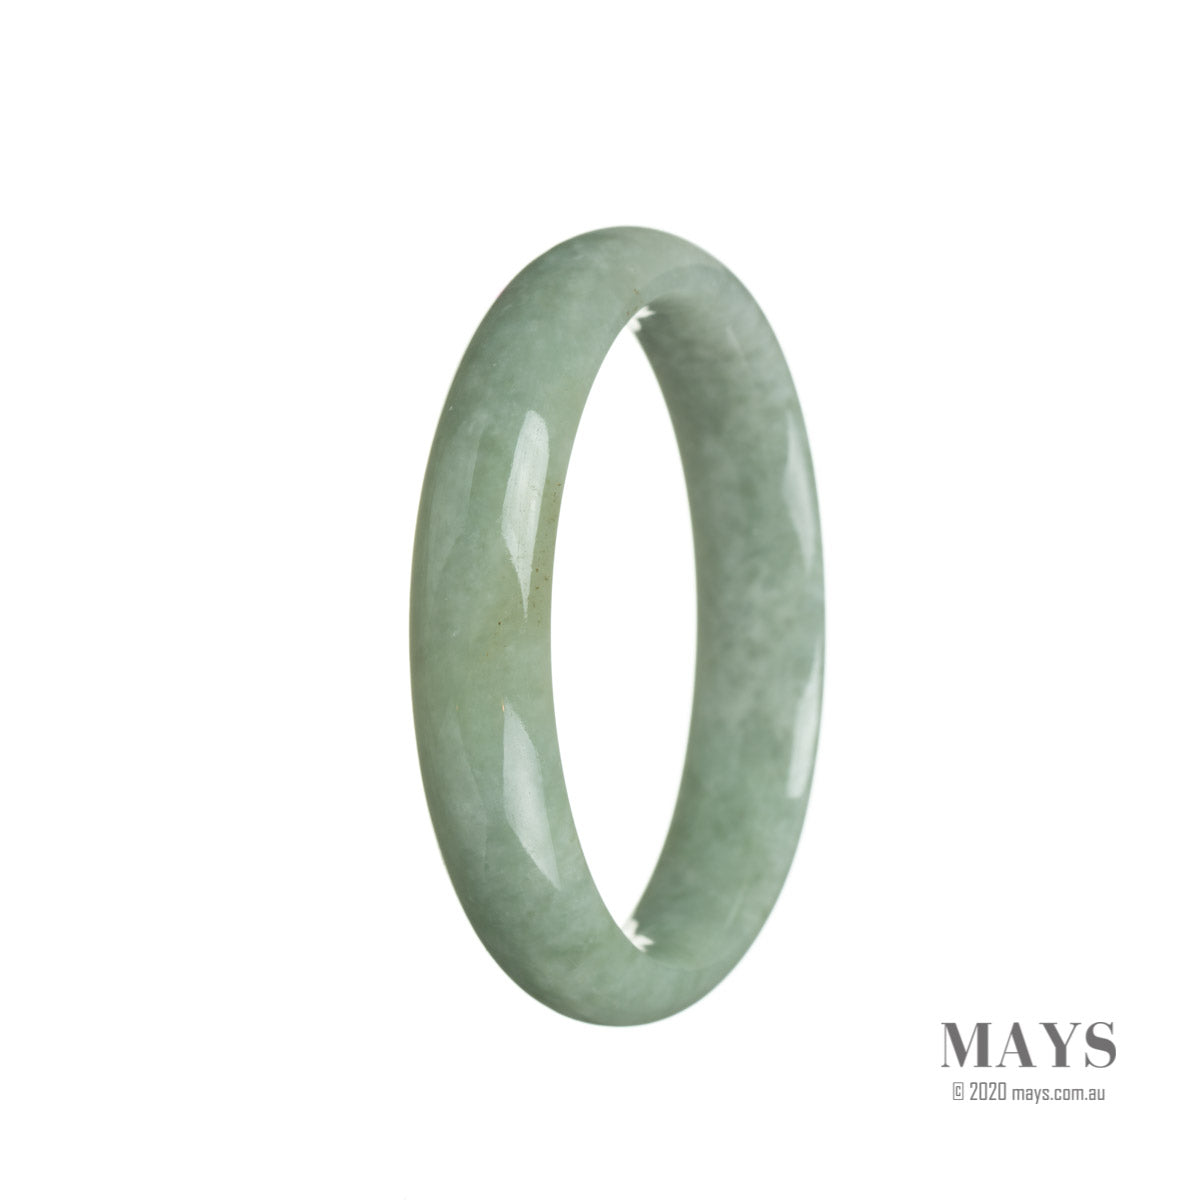 A beautiful green jade bracelet in the shape of a half moon, measuring 57mm in size. Perfect for adding a touch of natural elegance to any outfit. From the brand MAYS.